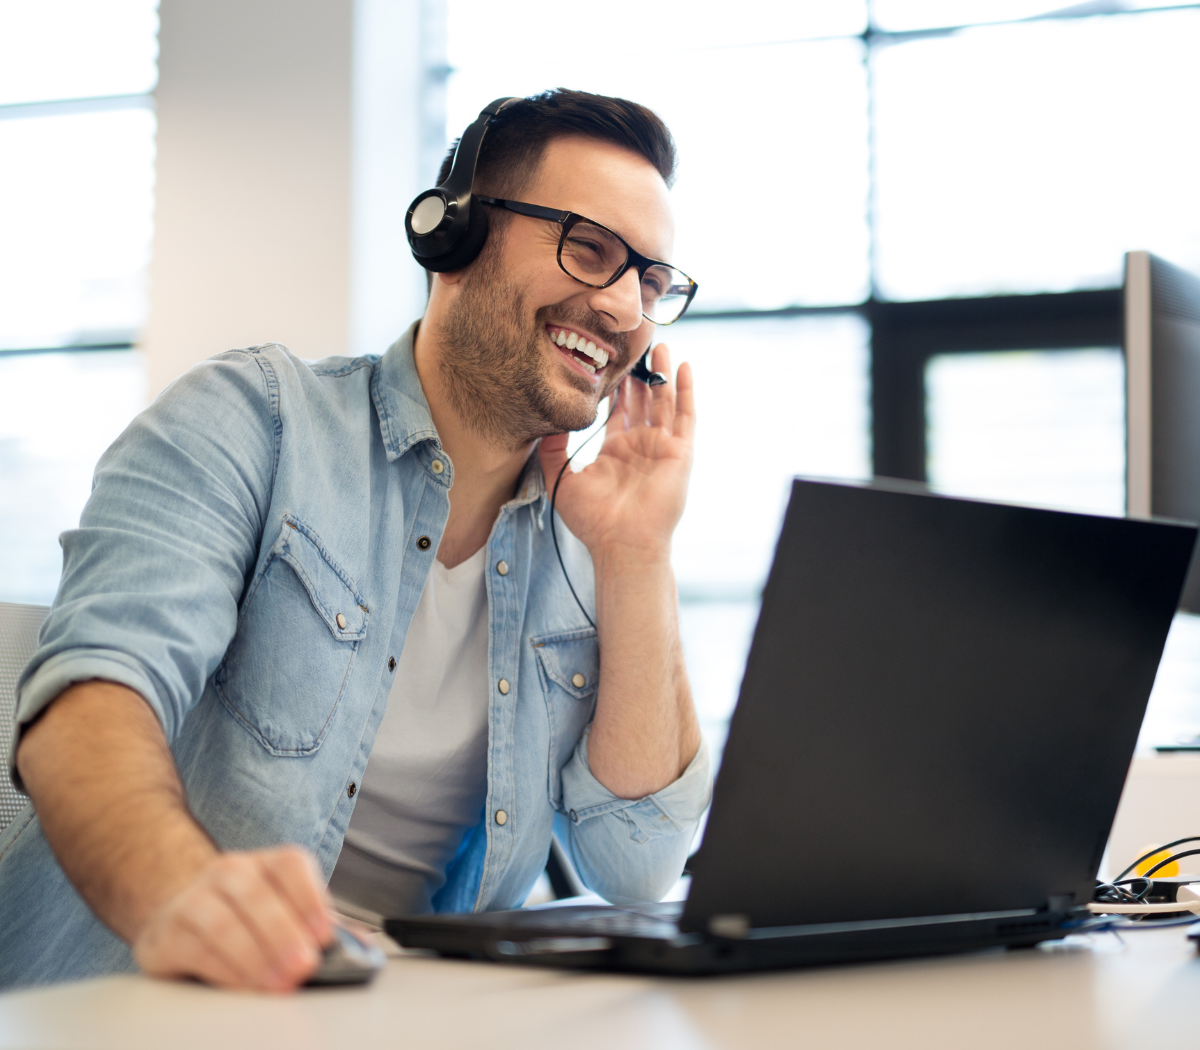 6 Ways to Improve VoIP Call Quality at Home or in the Office